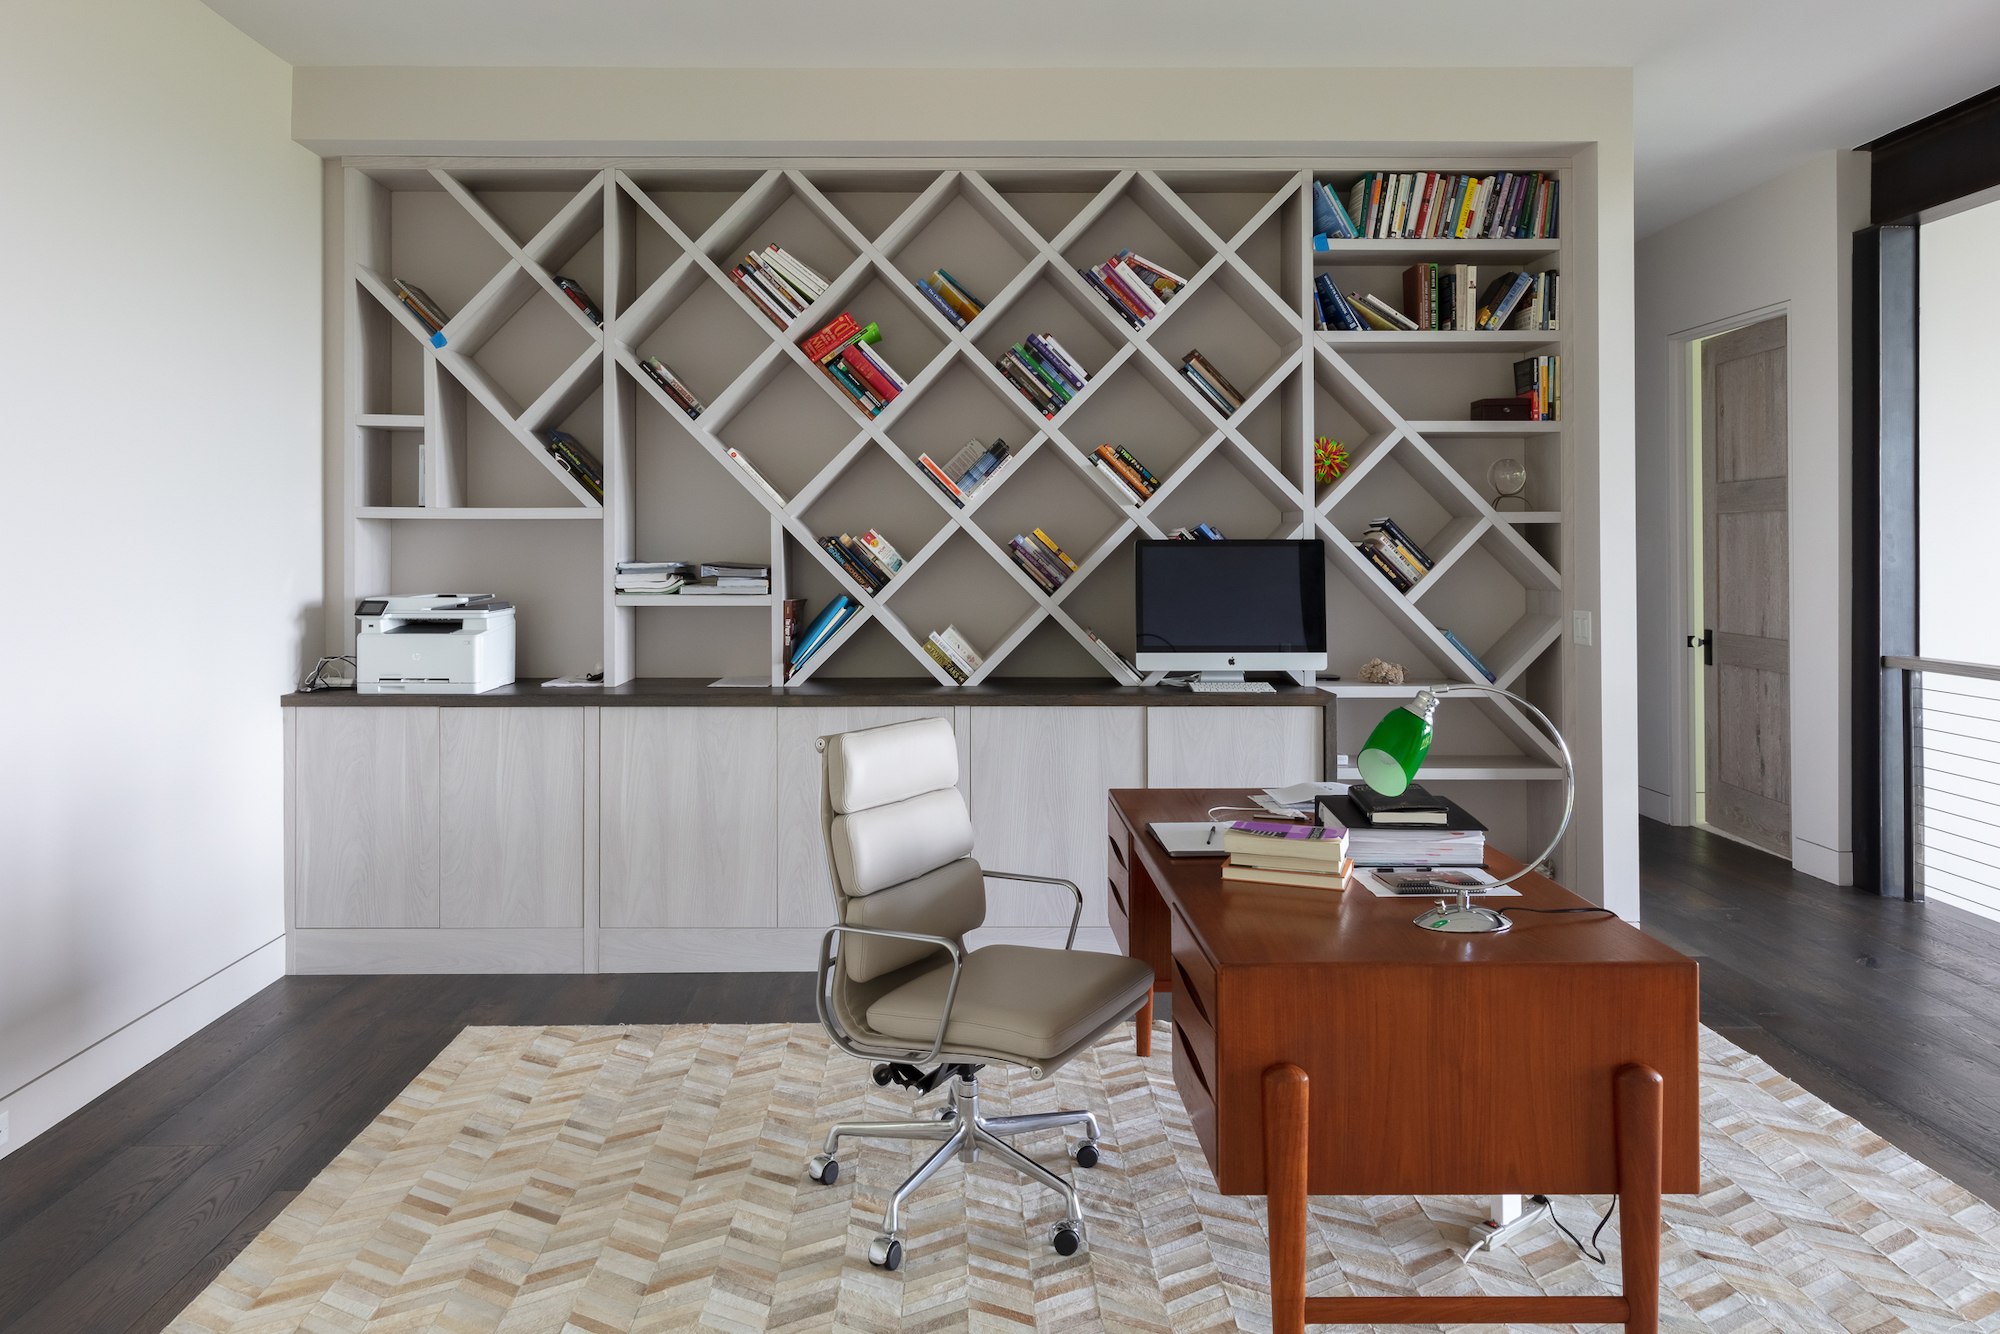 Custom designed home office with built-in shelves and inlaid flooring. Scandinavian meets mountain design.